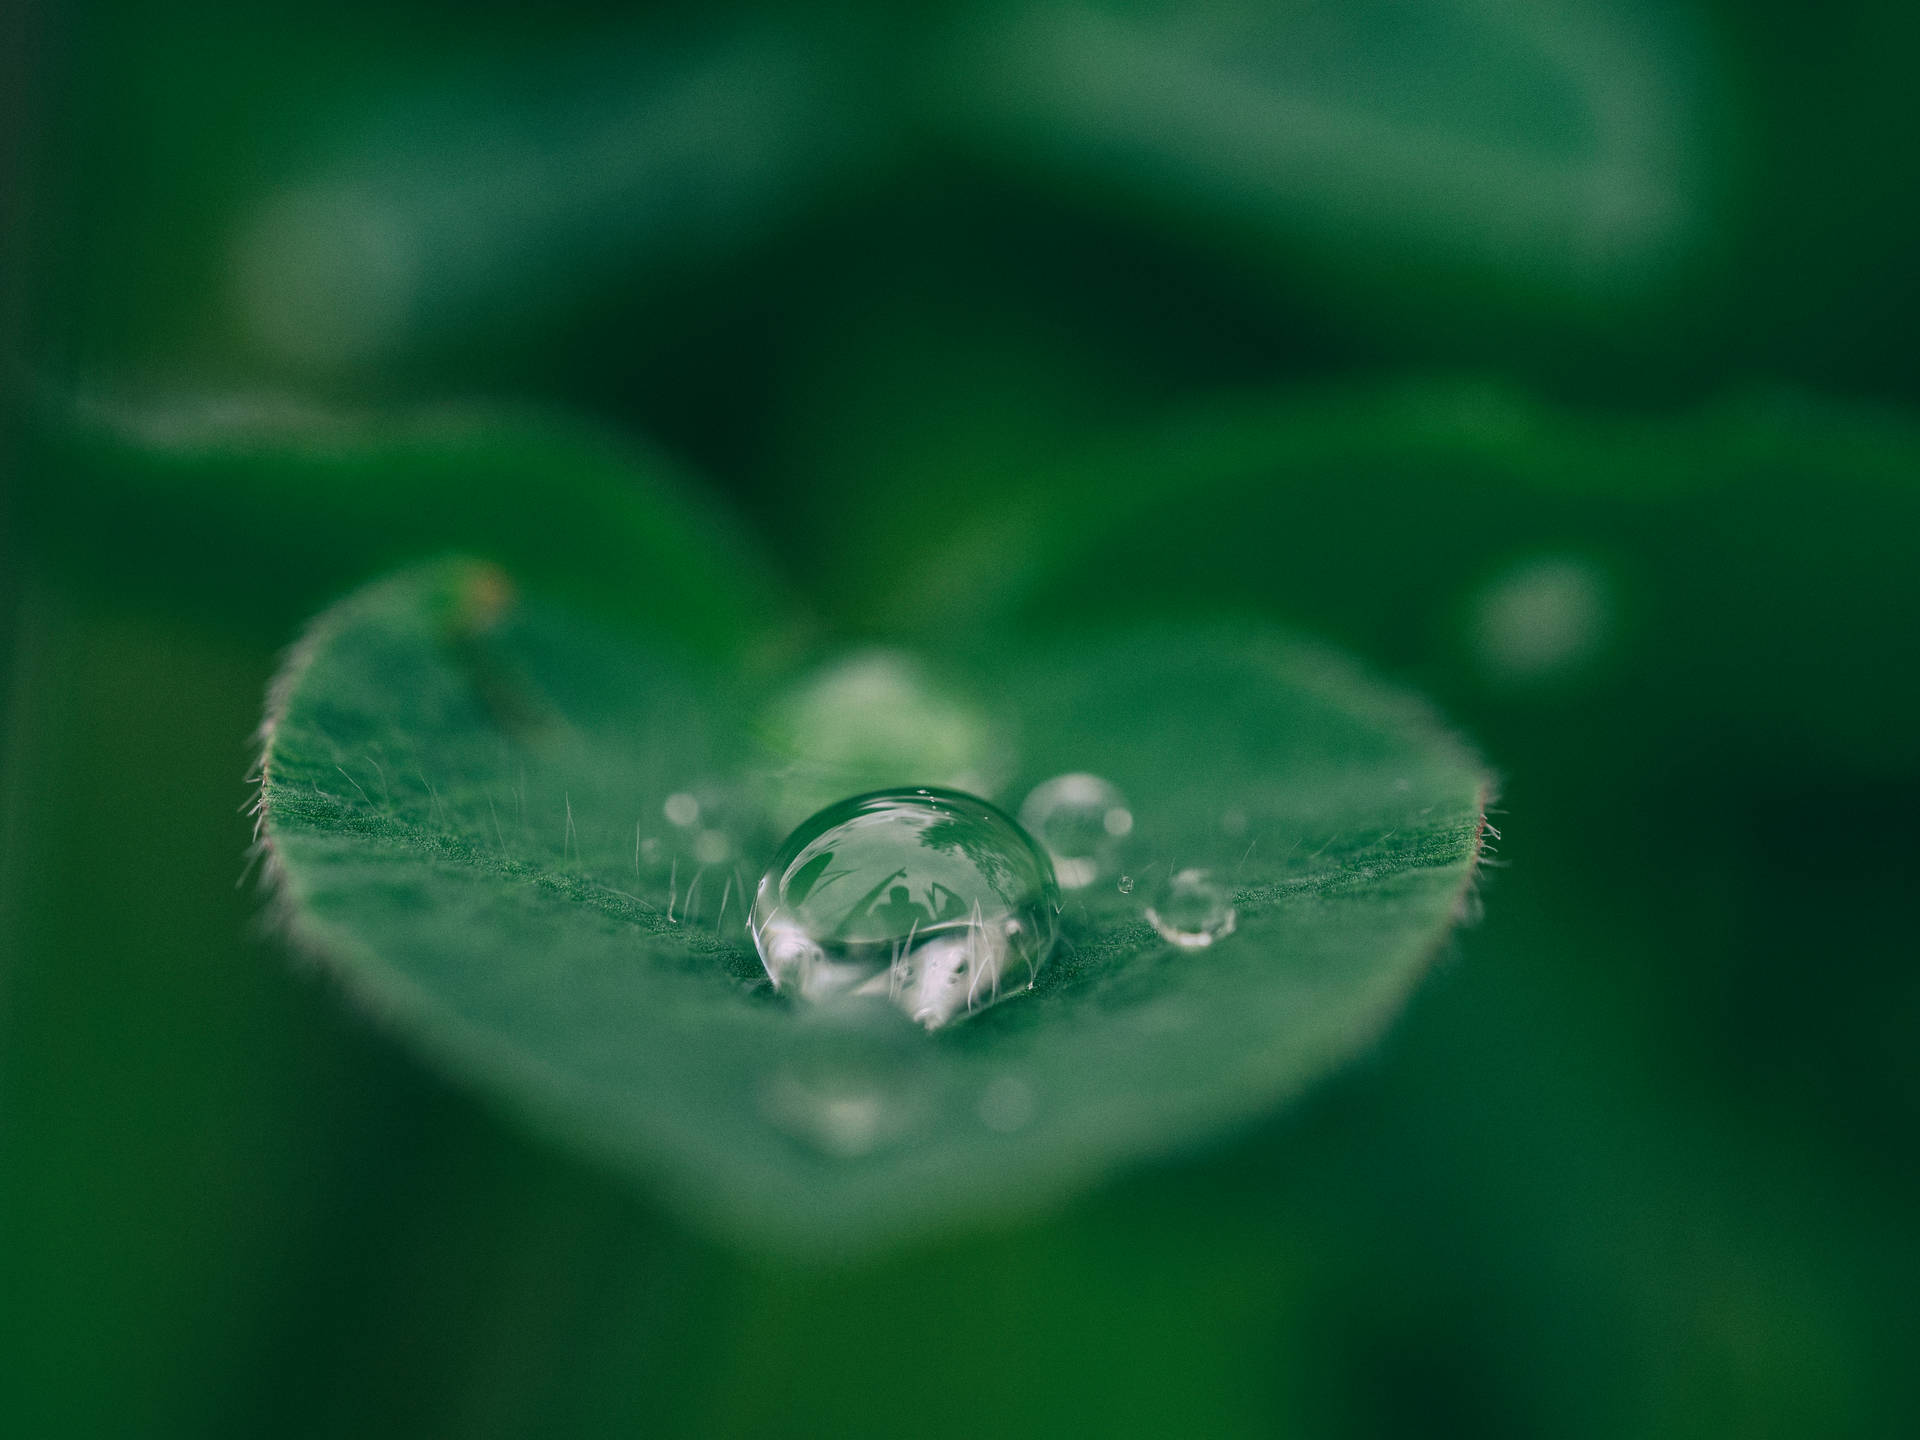 Droplets Of Dew Glisten On A Green Leaf Background